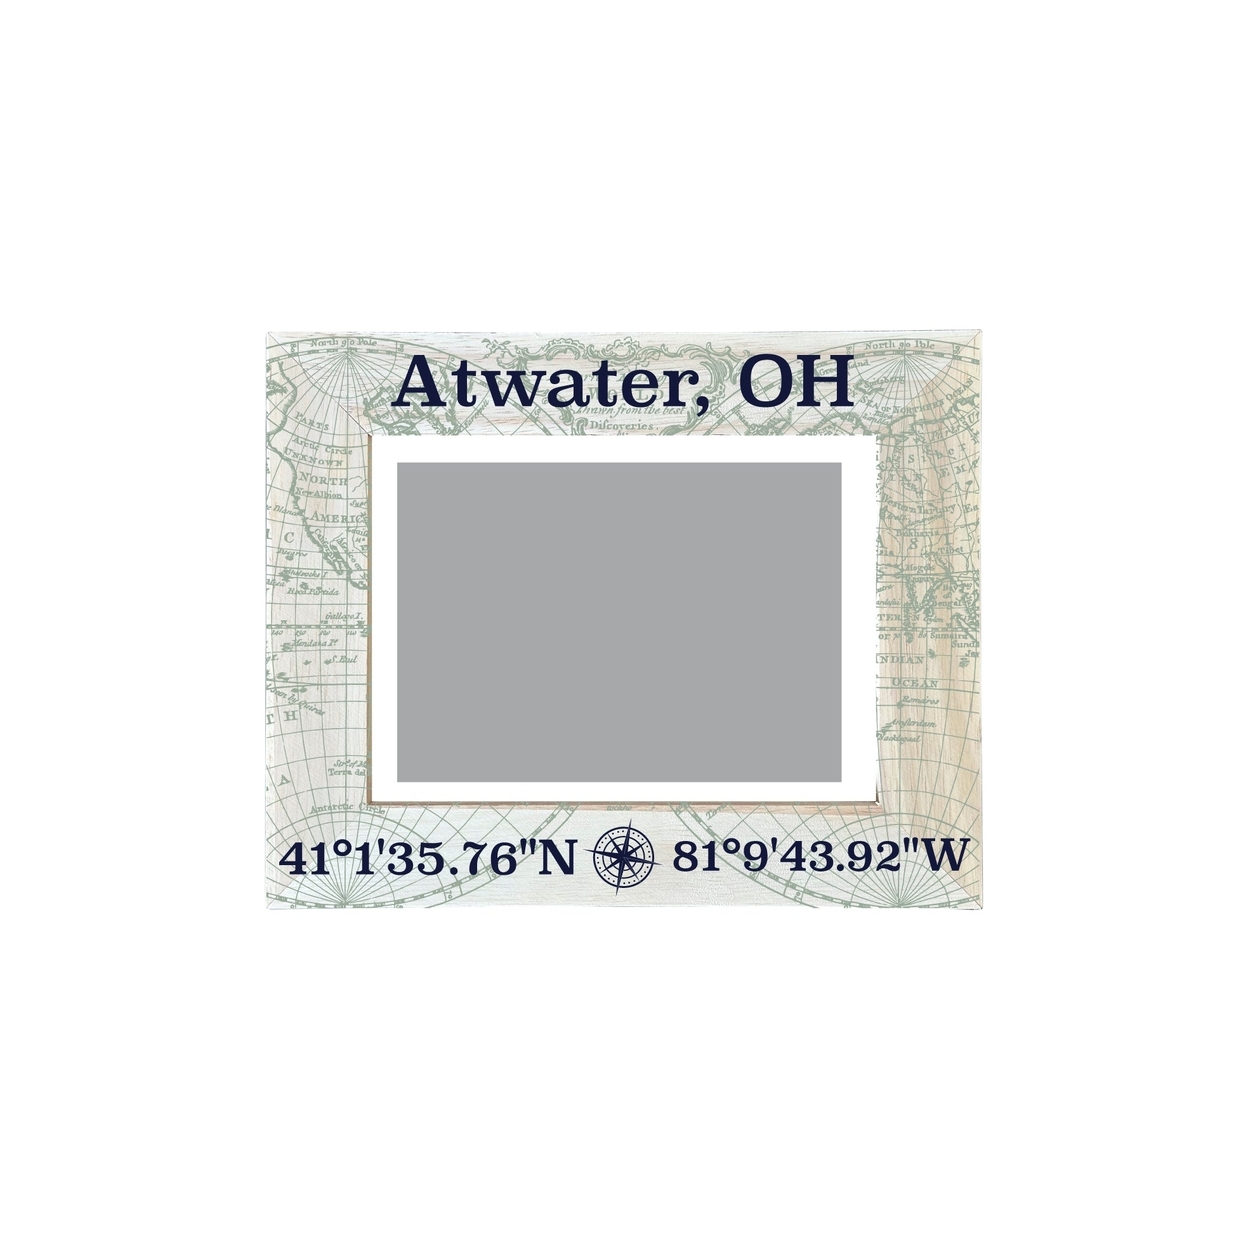 Atwater Ohio Souvenir Wooden Photo Frame Compass Coordinates Design Matted To 4 X 6